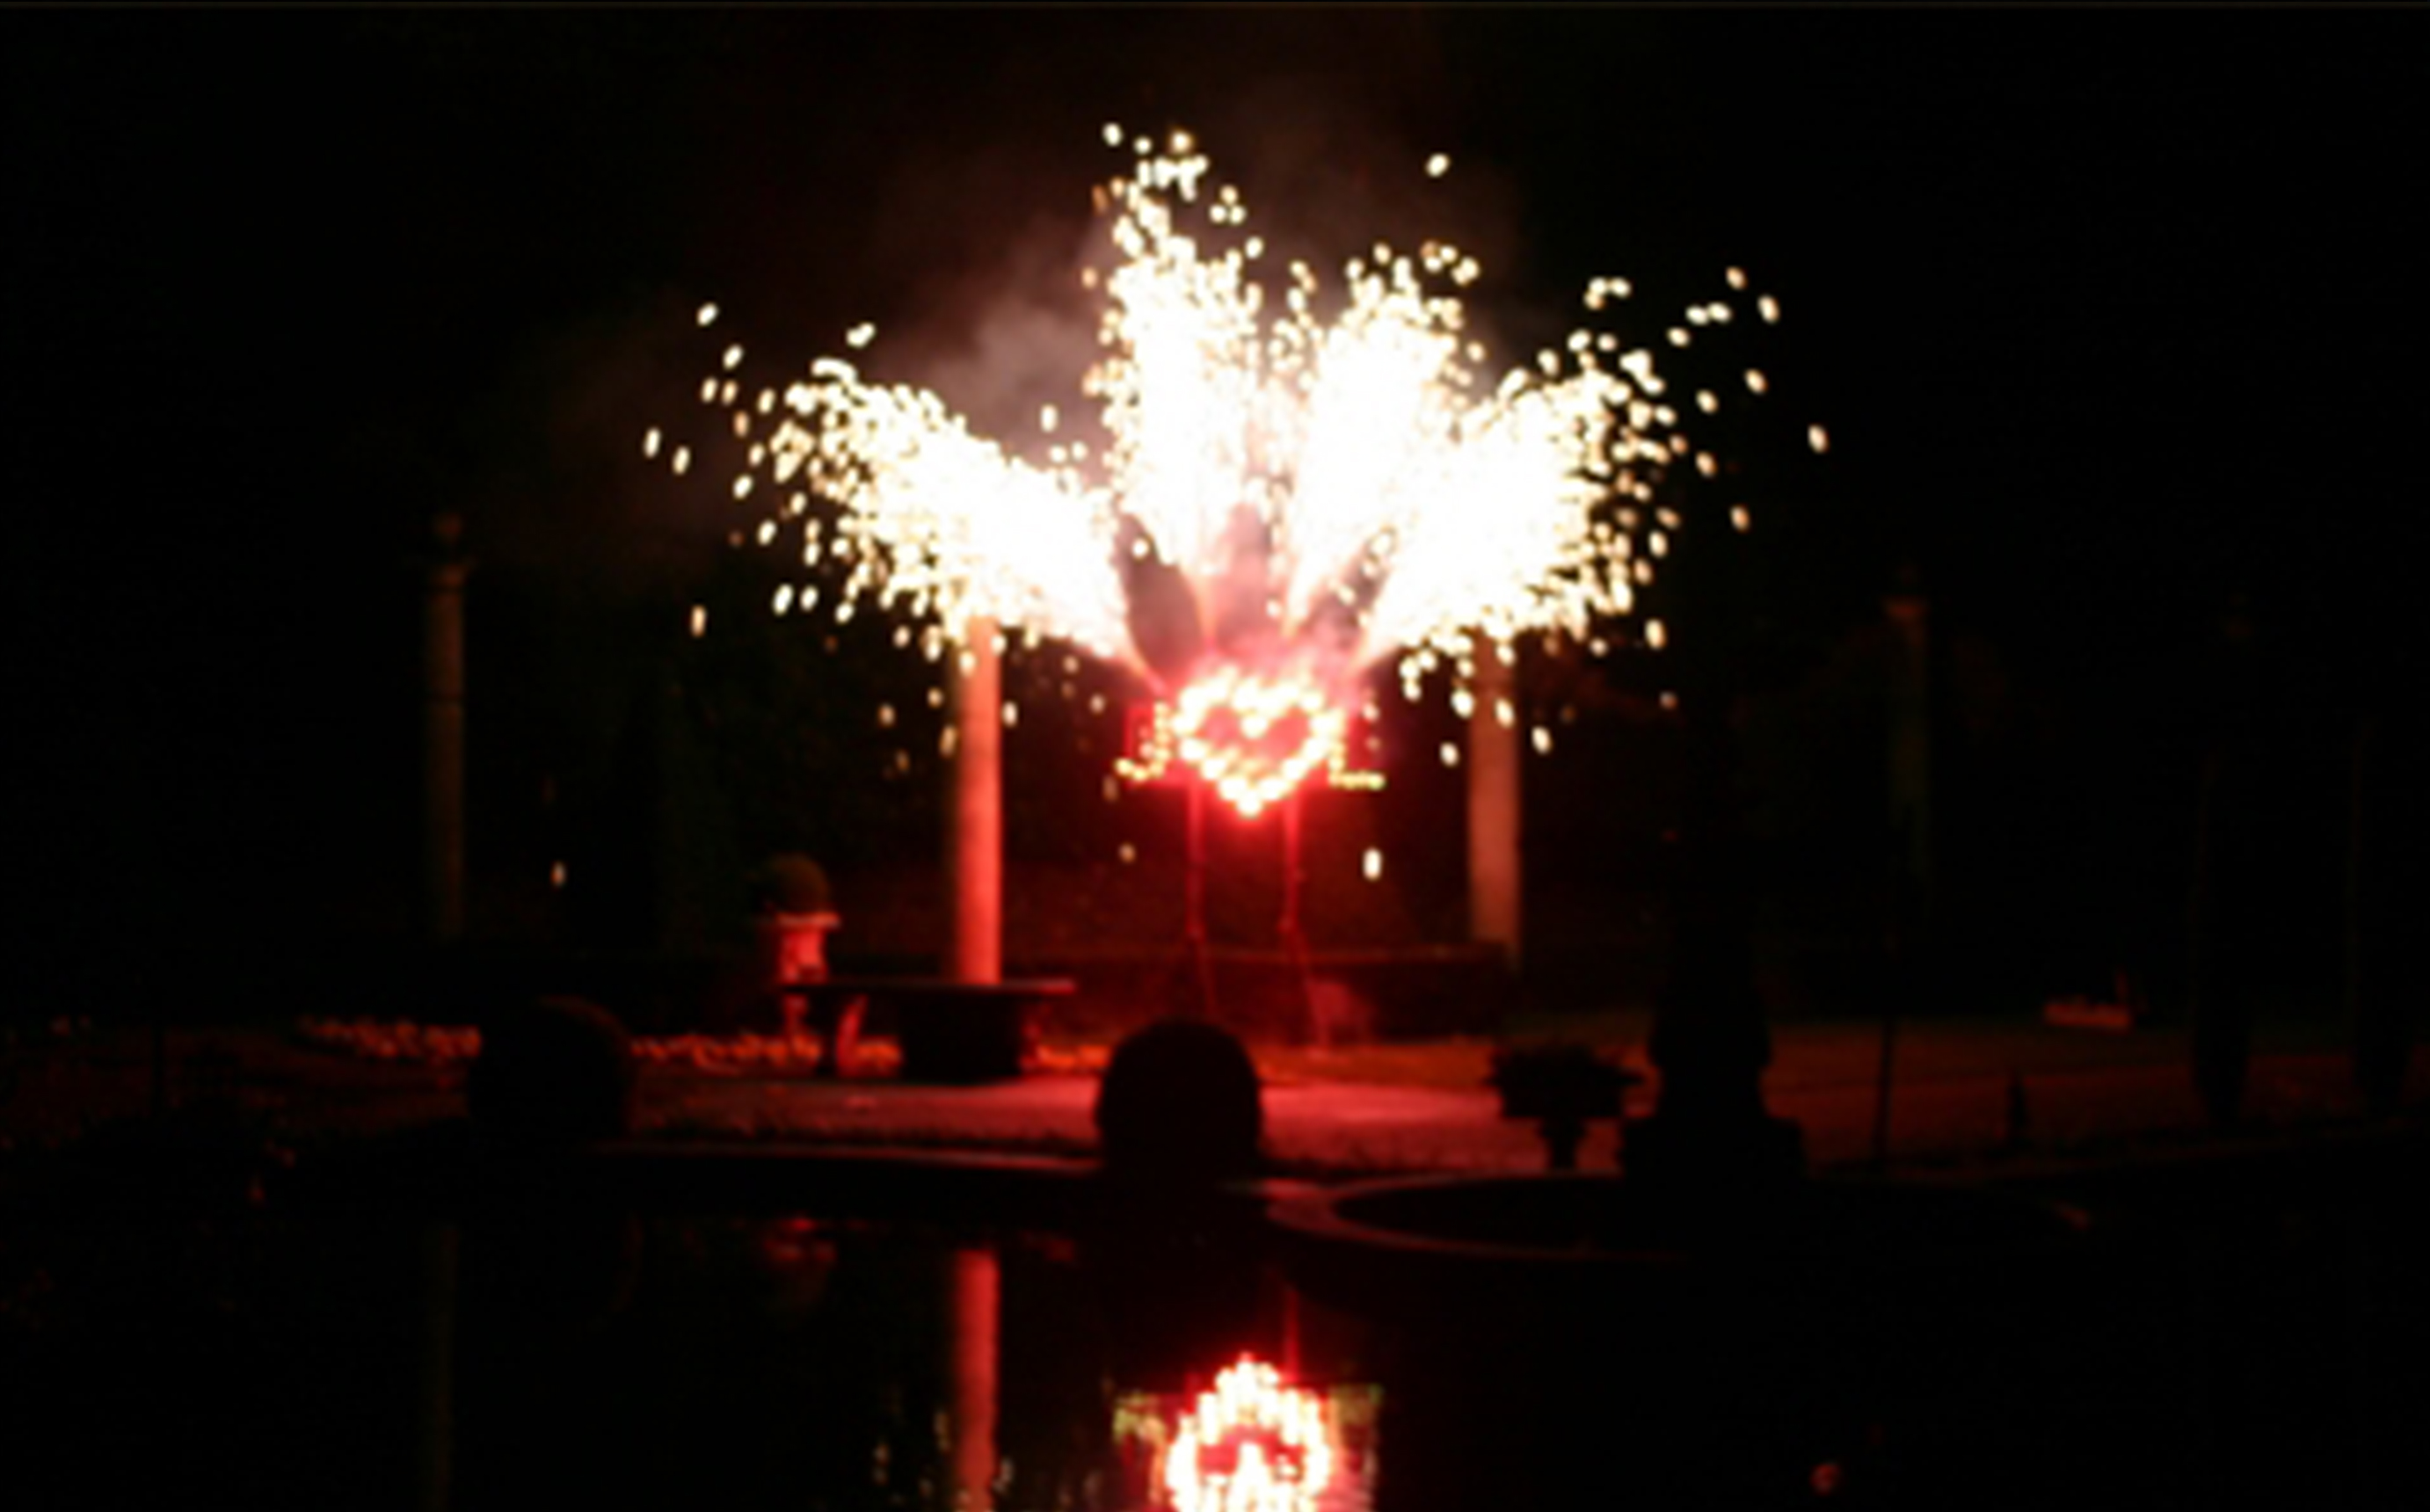 A Firework Solutions Limited wedding display, featuring a red heart for the happy couple